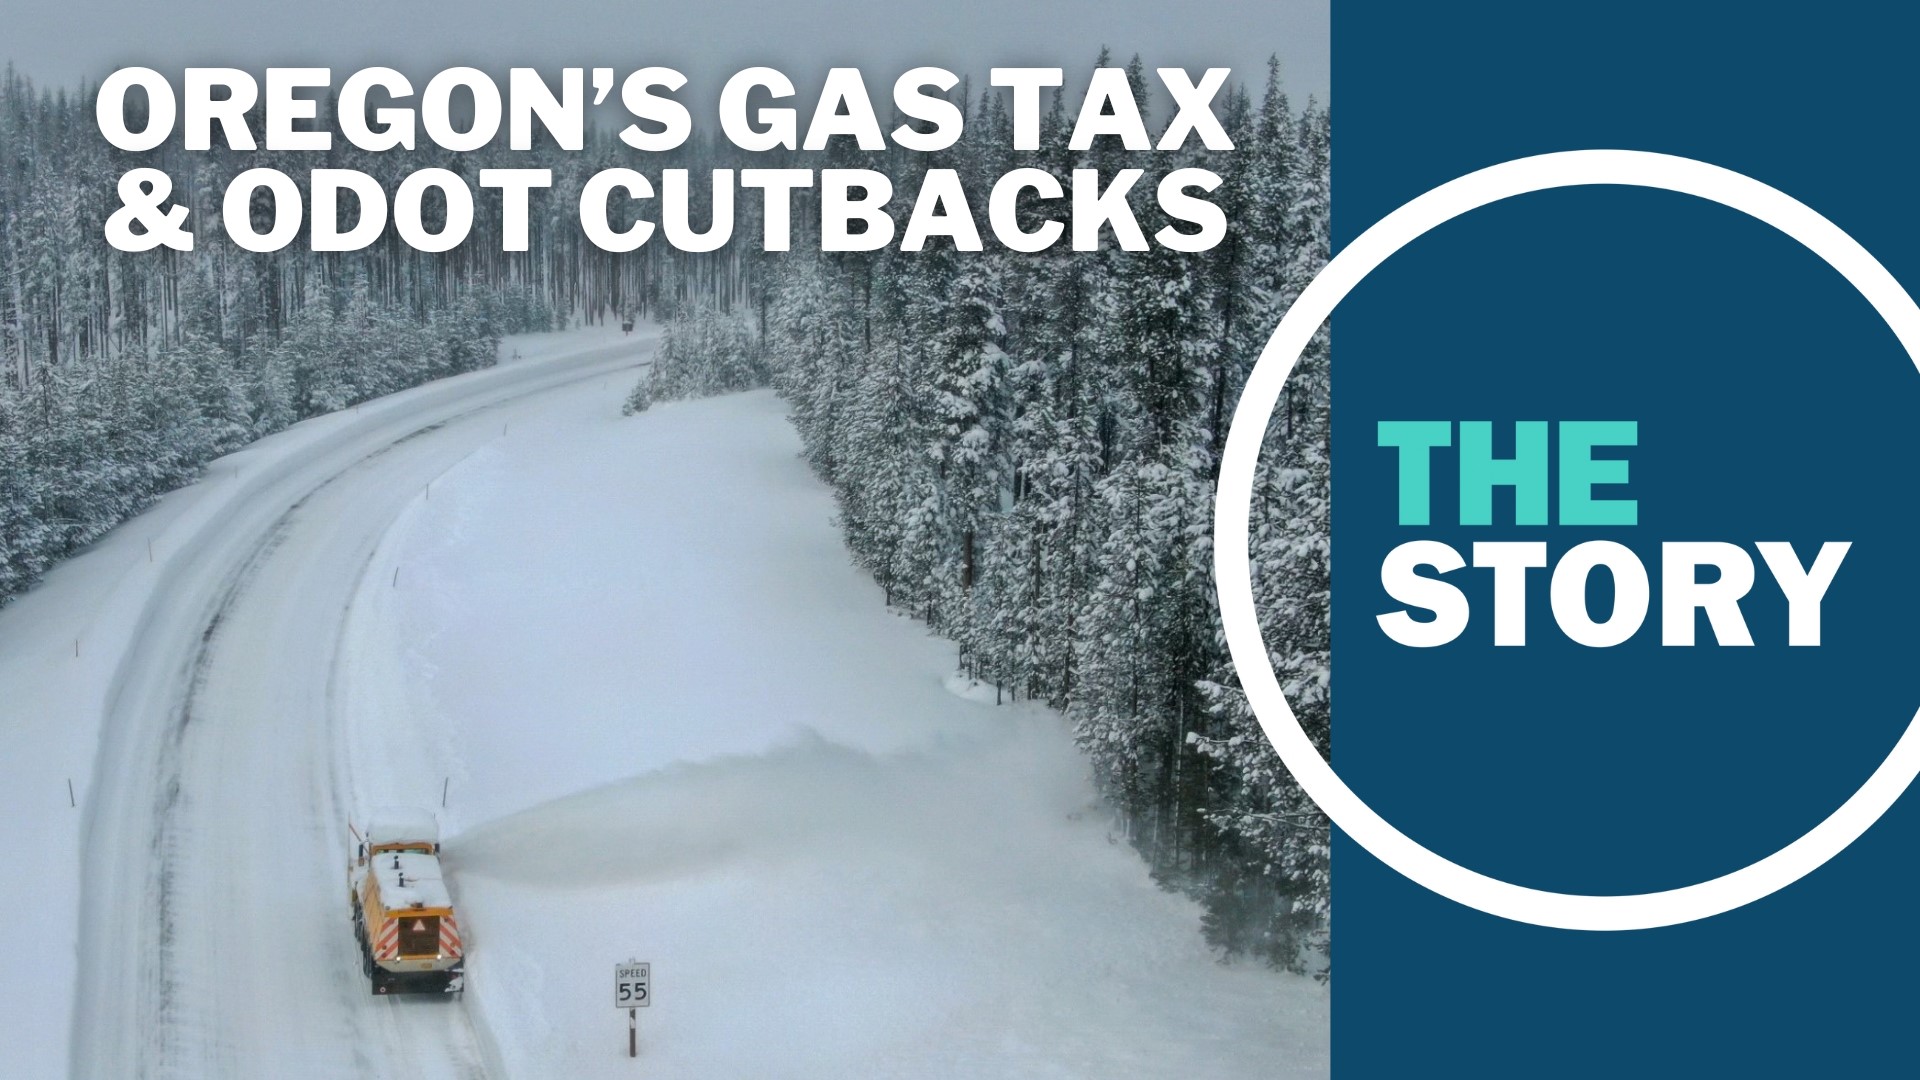 The agency warned in October that it would have to scale back winter weather road services because fuel tax revenue is declining. We looked into that claim.